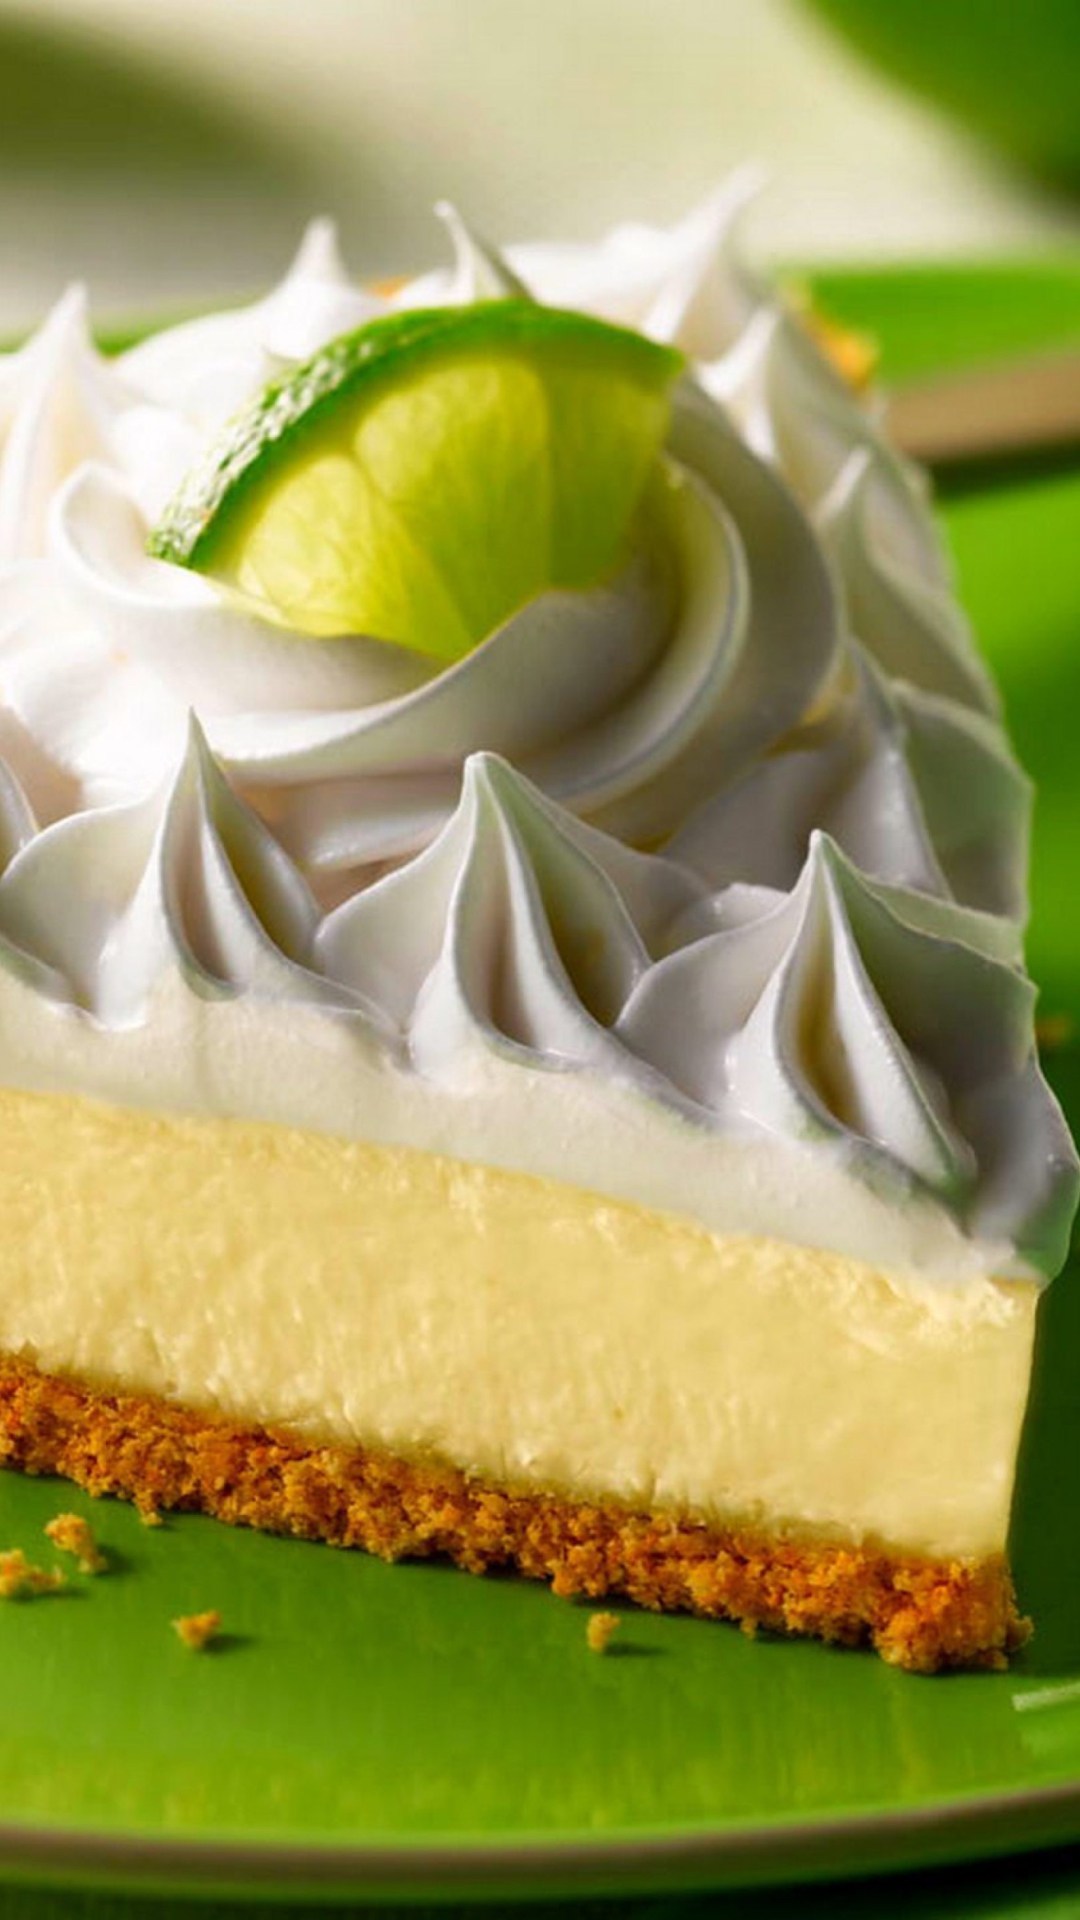 Lime Cheesecake Wallpaper Iphone - Key Lime Pie America , HD Wallpaper & Backgrounds